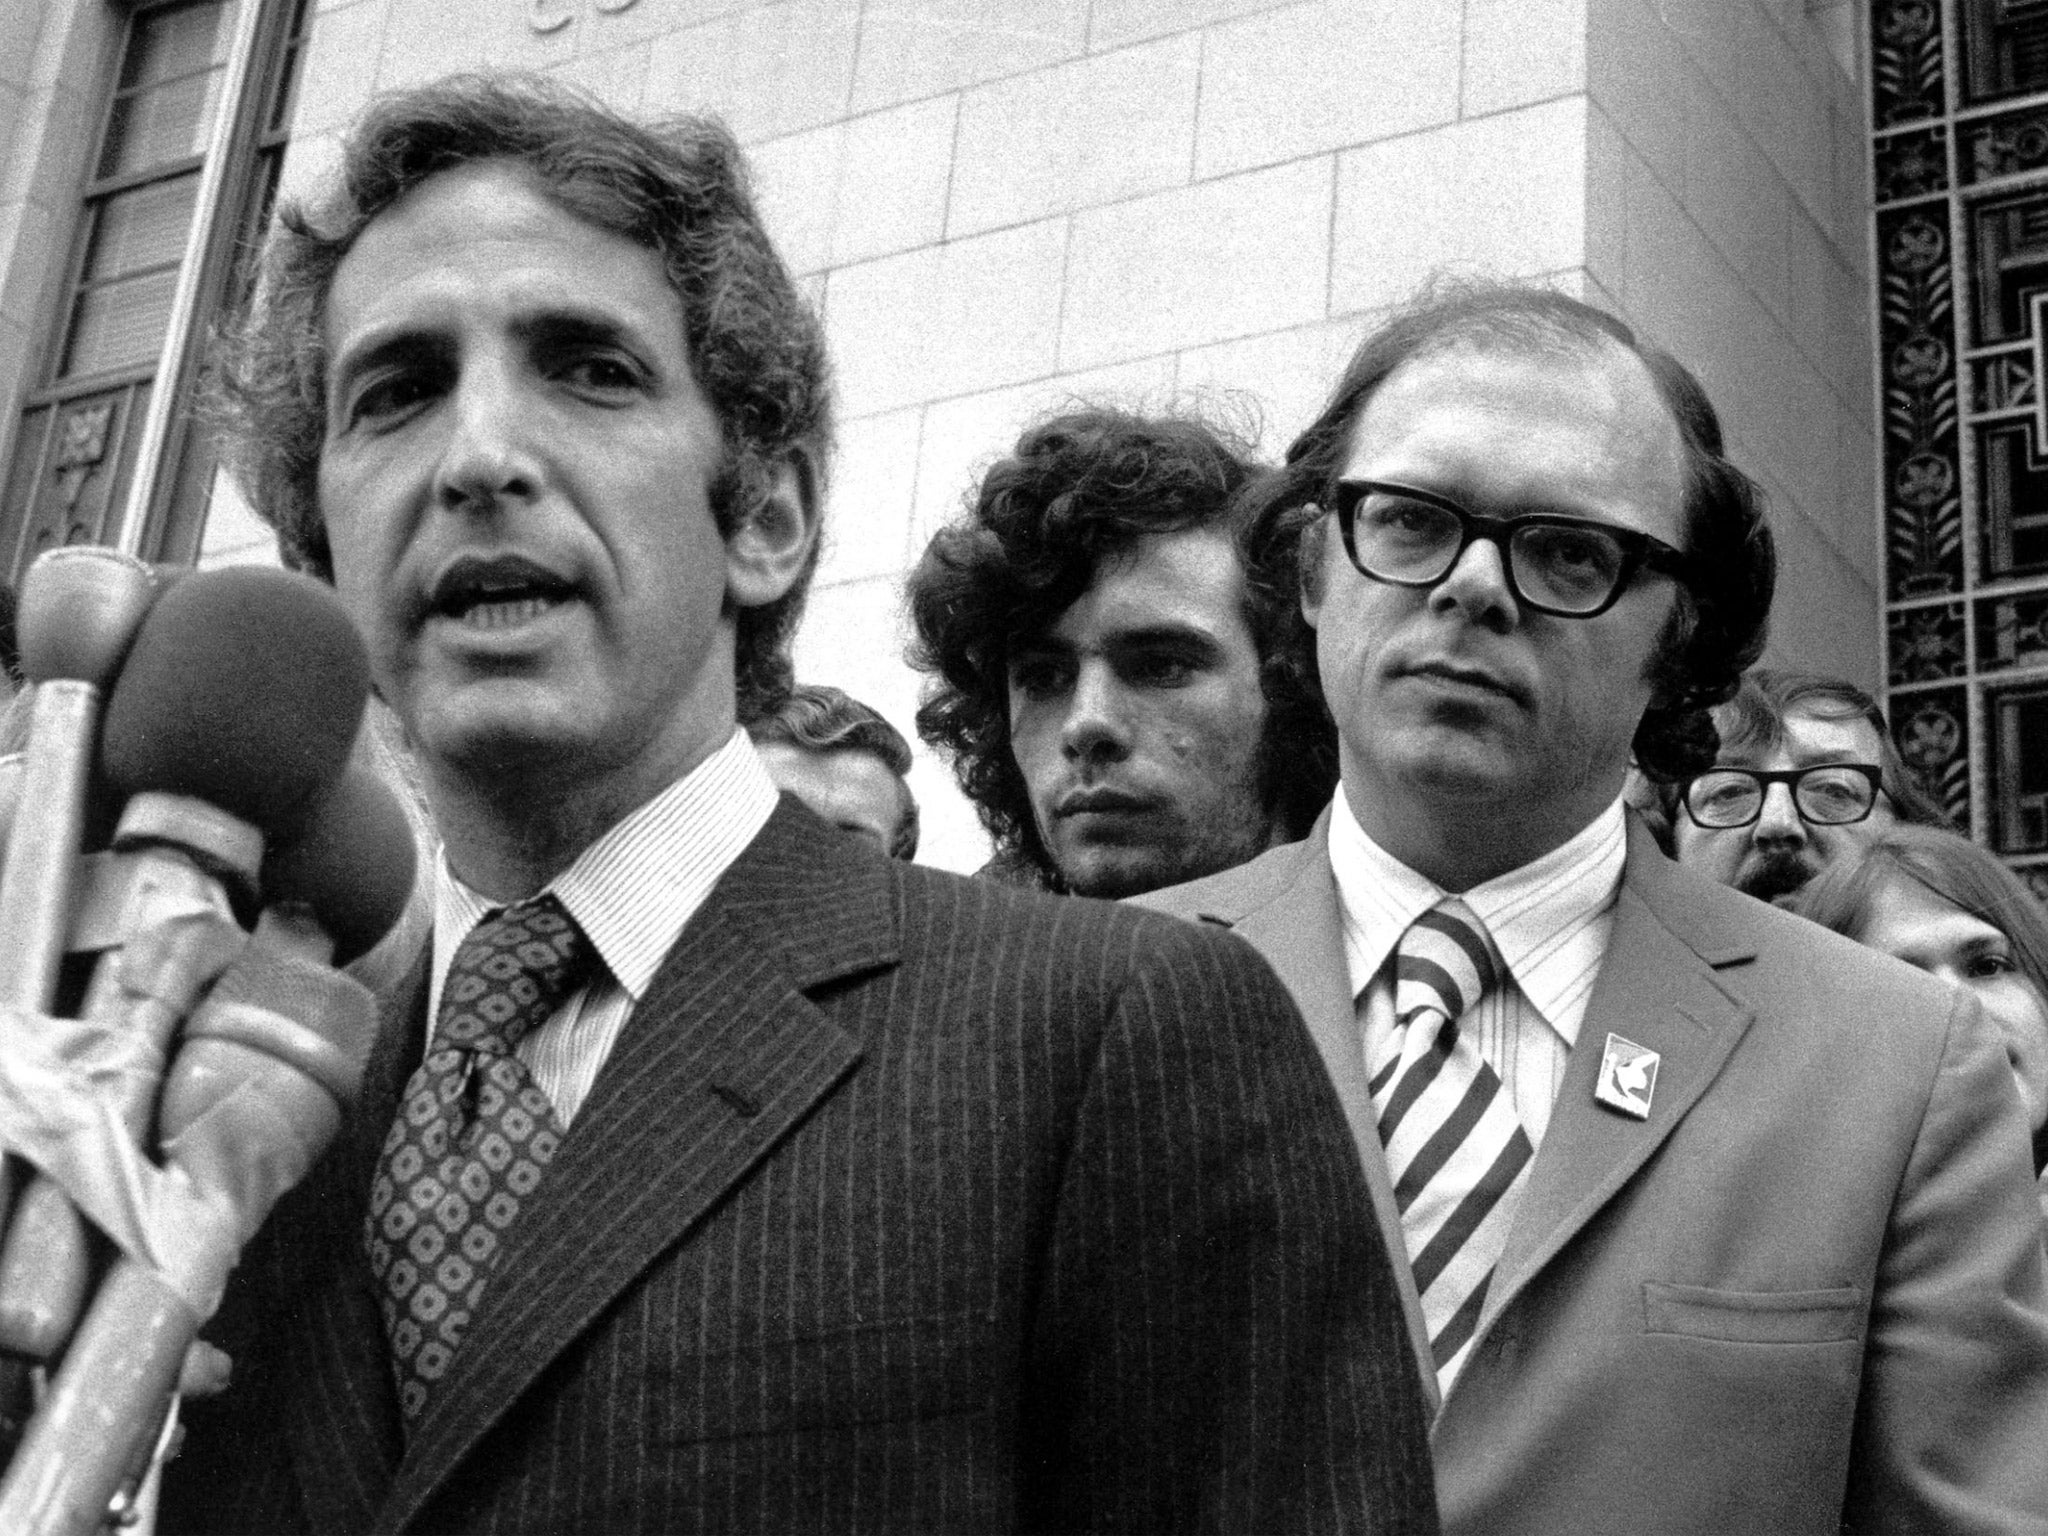 Daniel Ellsberg, pictured centre in 1973, chose to stand his ground and was vindicated